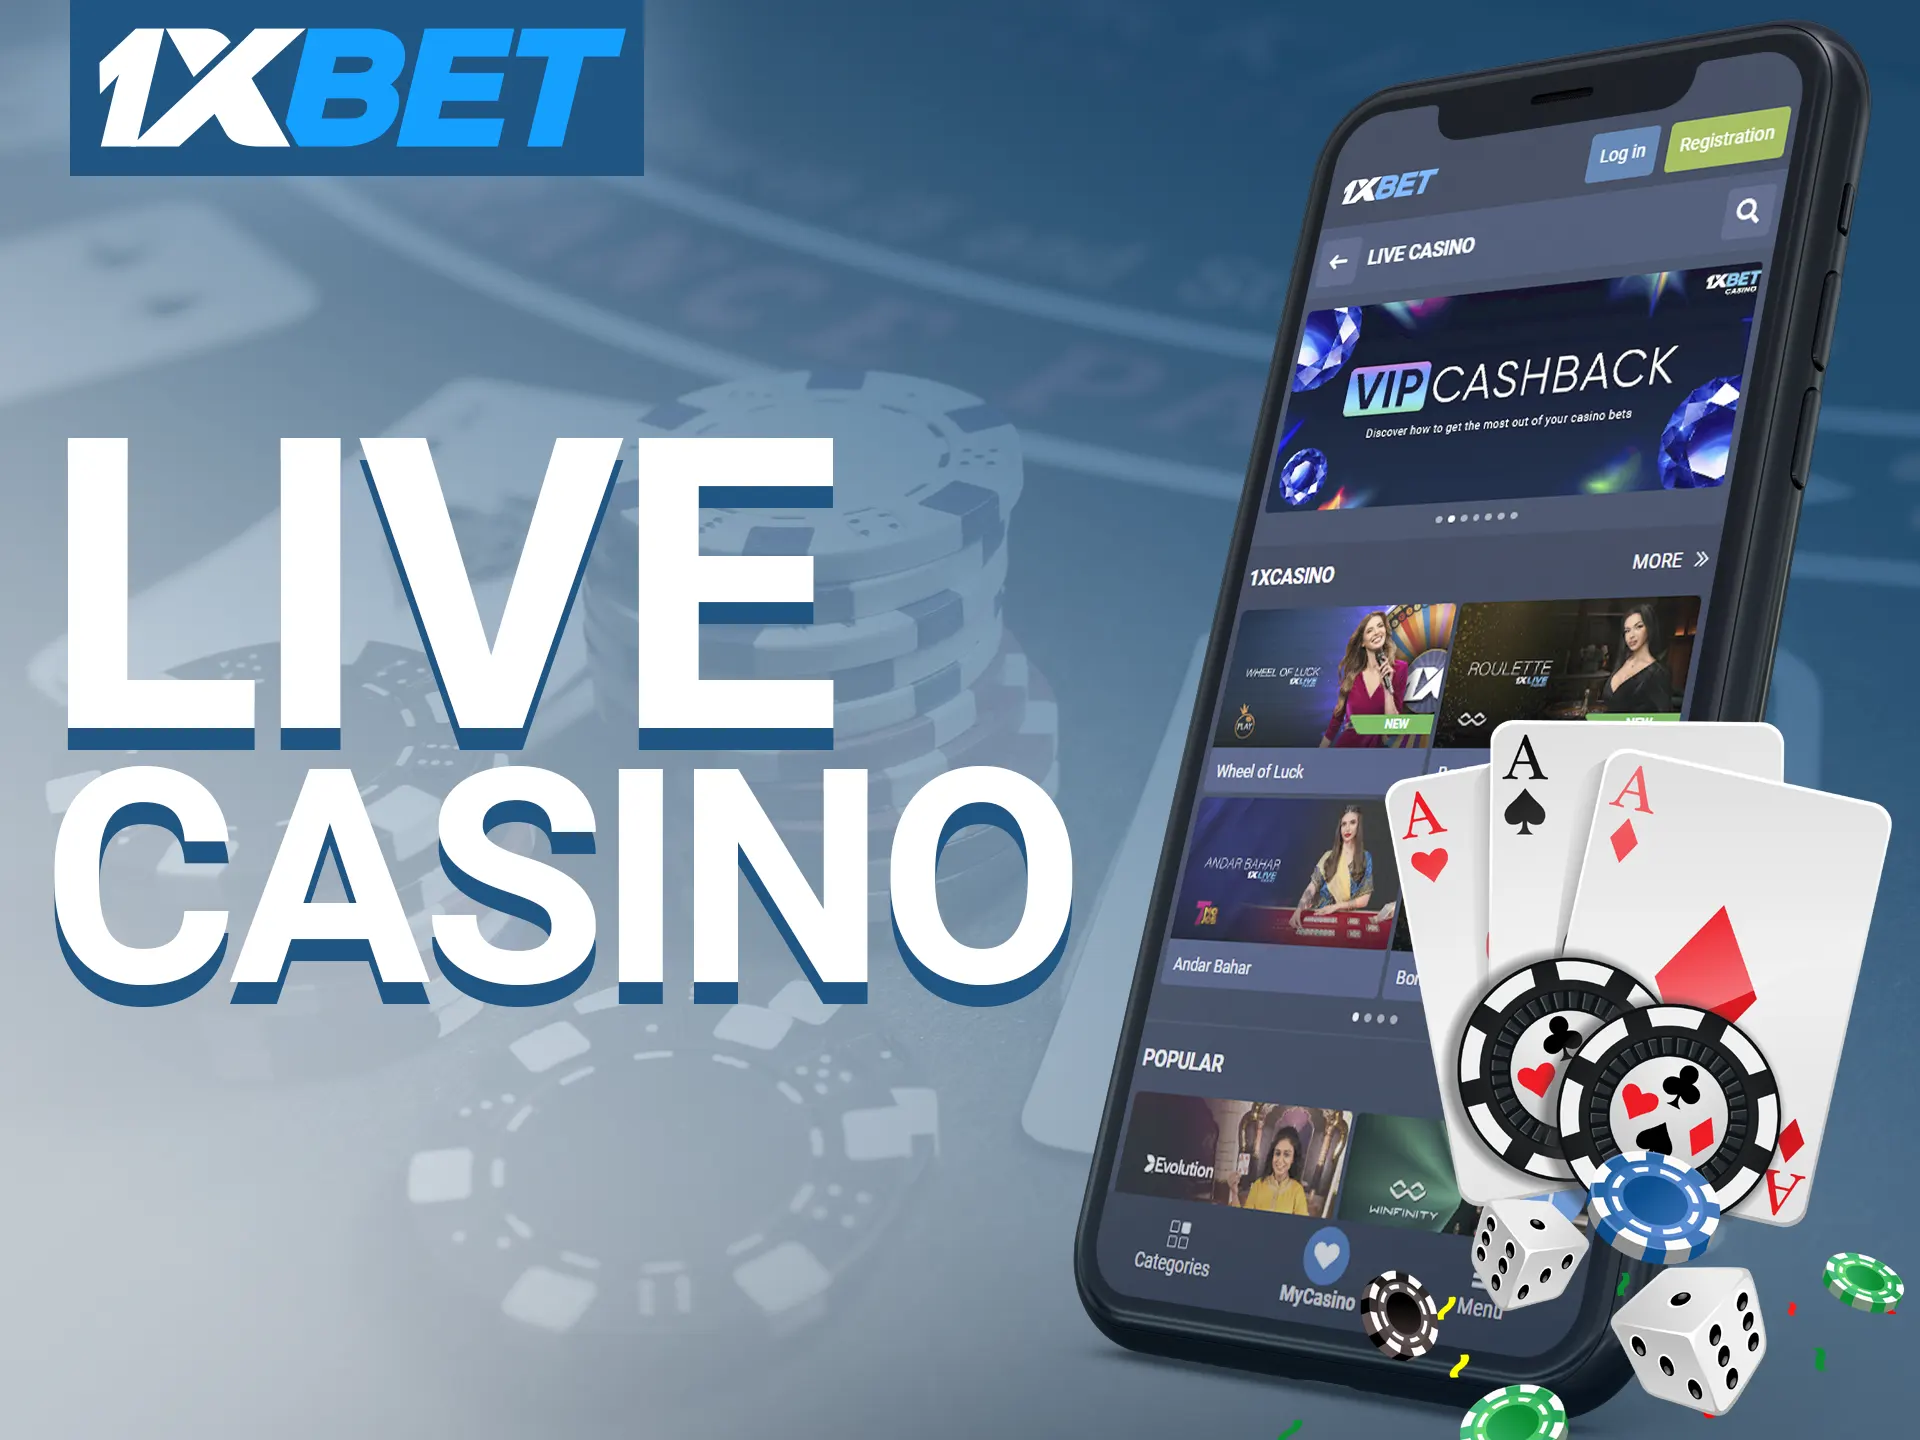 On the 1xbet app, players can interact with live dealers and access live casino games.